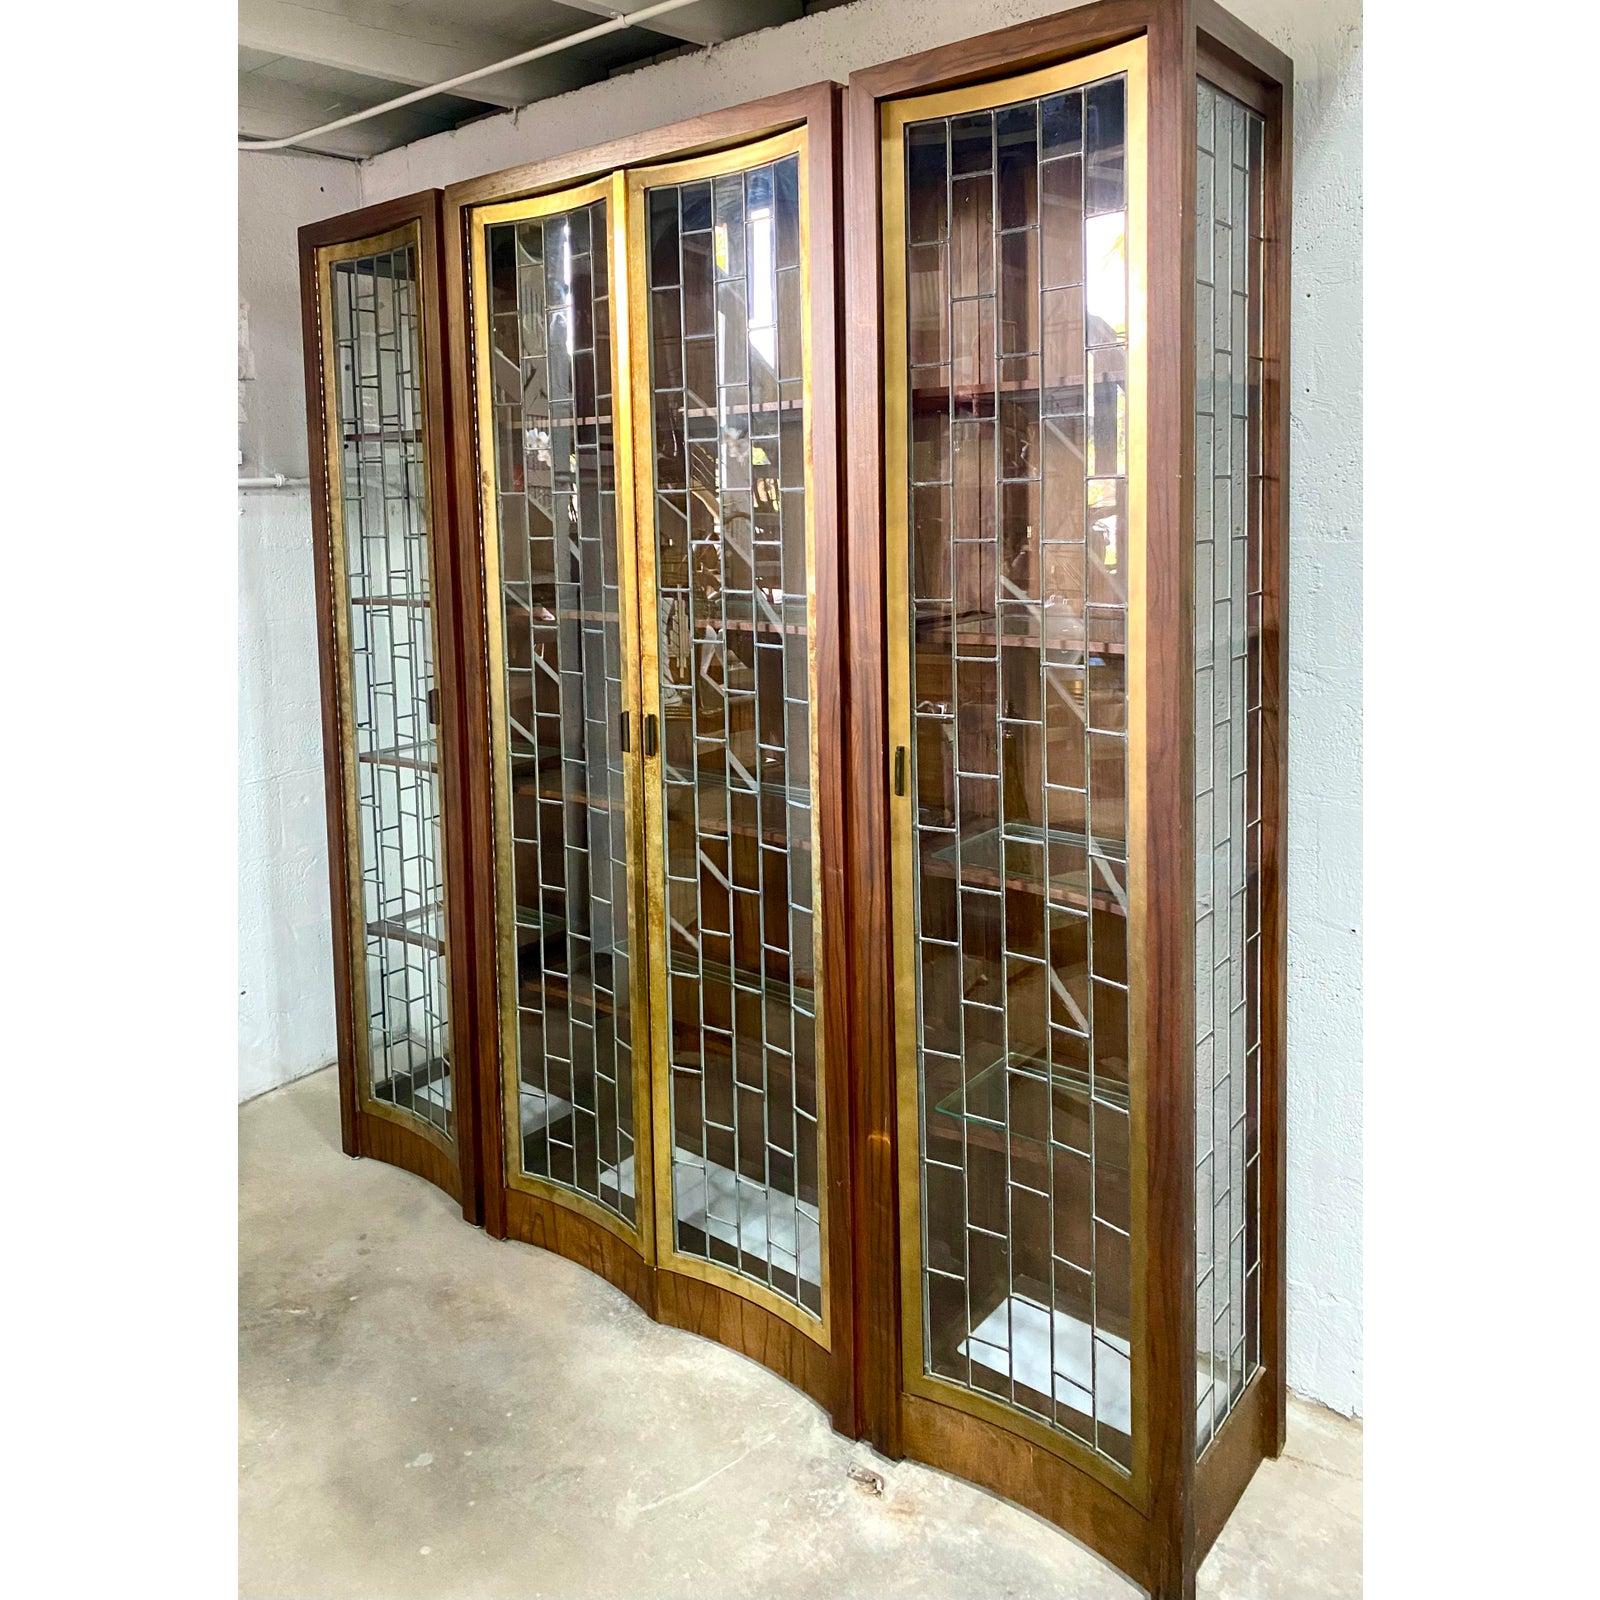 Stunning Vintage Heritage etagere. Beautiful curved leaded glass door. Lighting in the top and the bottom with inset glass shelves. Brass trim around each panel. Breaks down into three sections for easy movement.